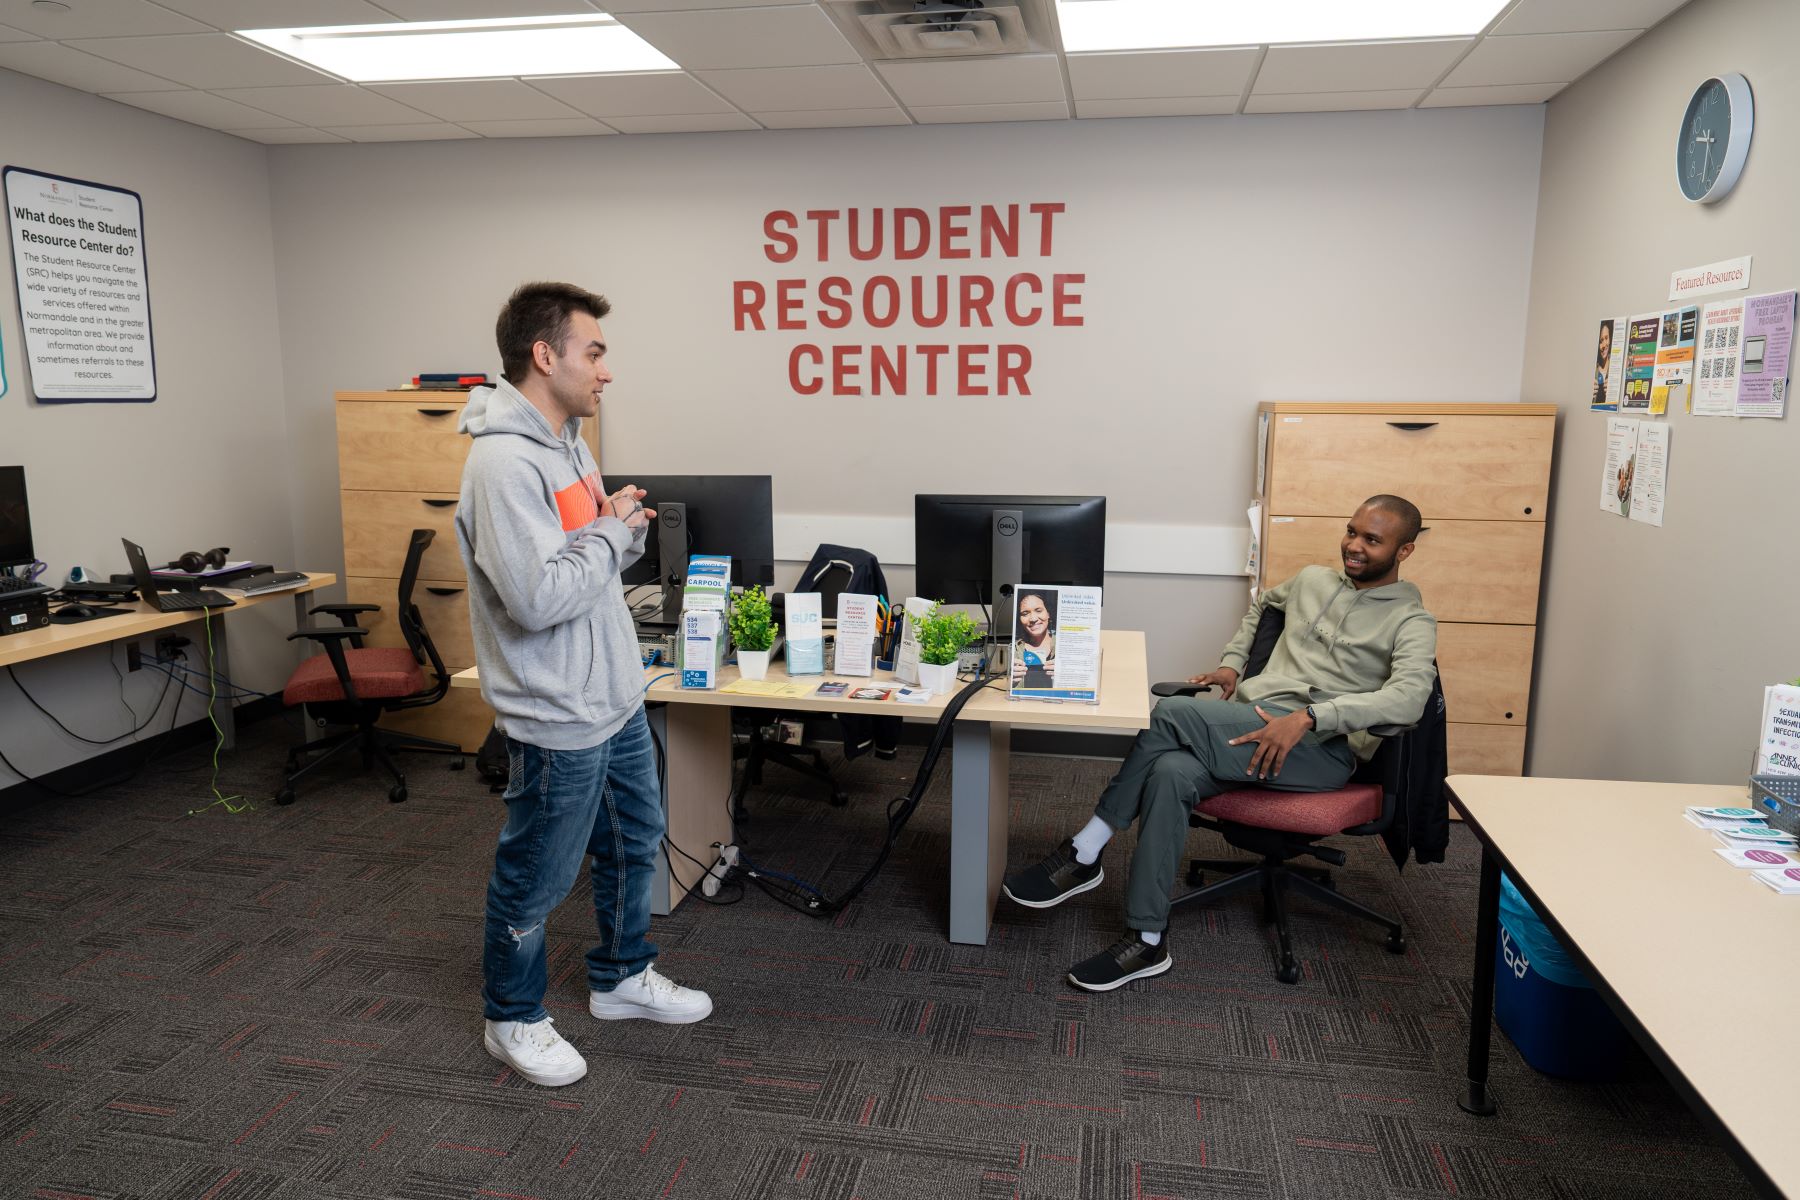 A student receives help in the Student Resource Center.